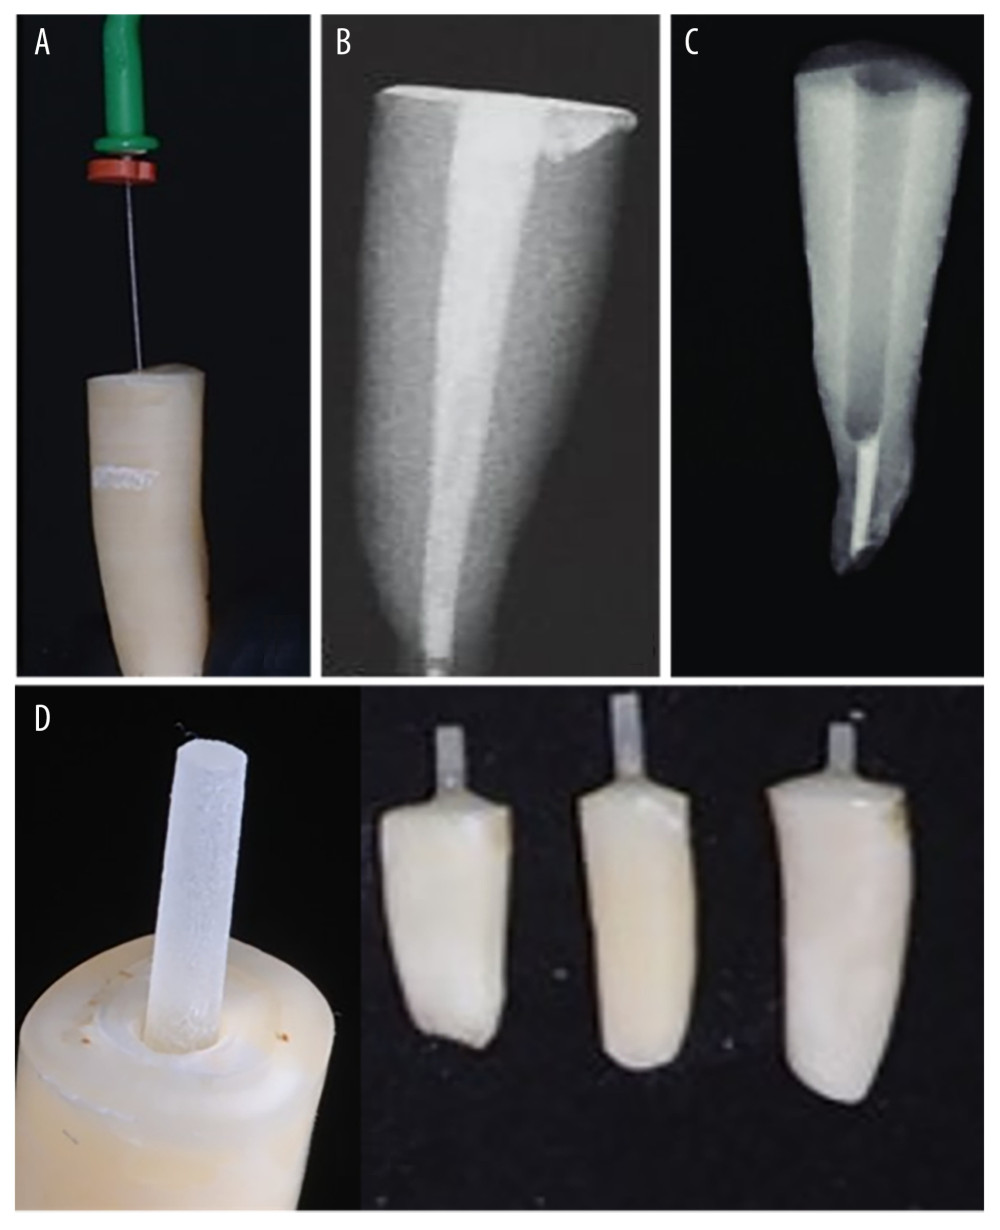 During endodontic treatment, (A) working length, (B) filling the canal with gutta percha, (C) post space preparation, and (D) after cementation of posts.